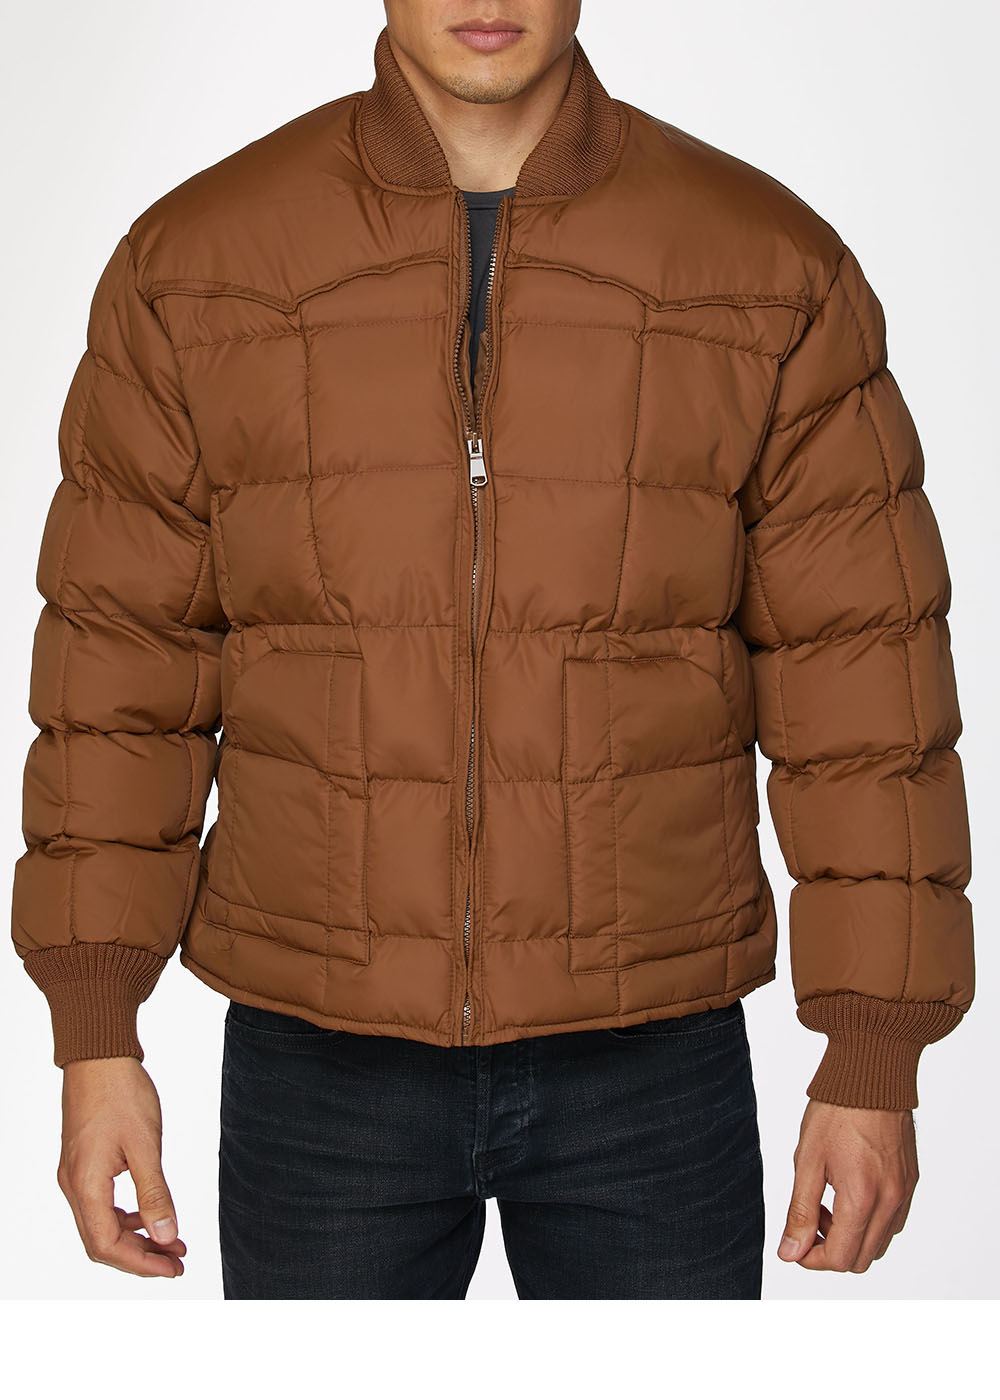 RODEO CLOTHING Men's Western Quilted Nylon Jacket-Cognac